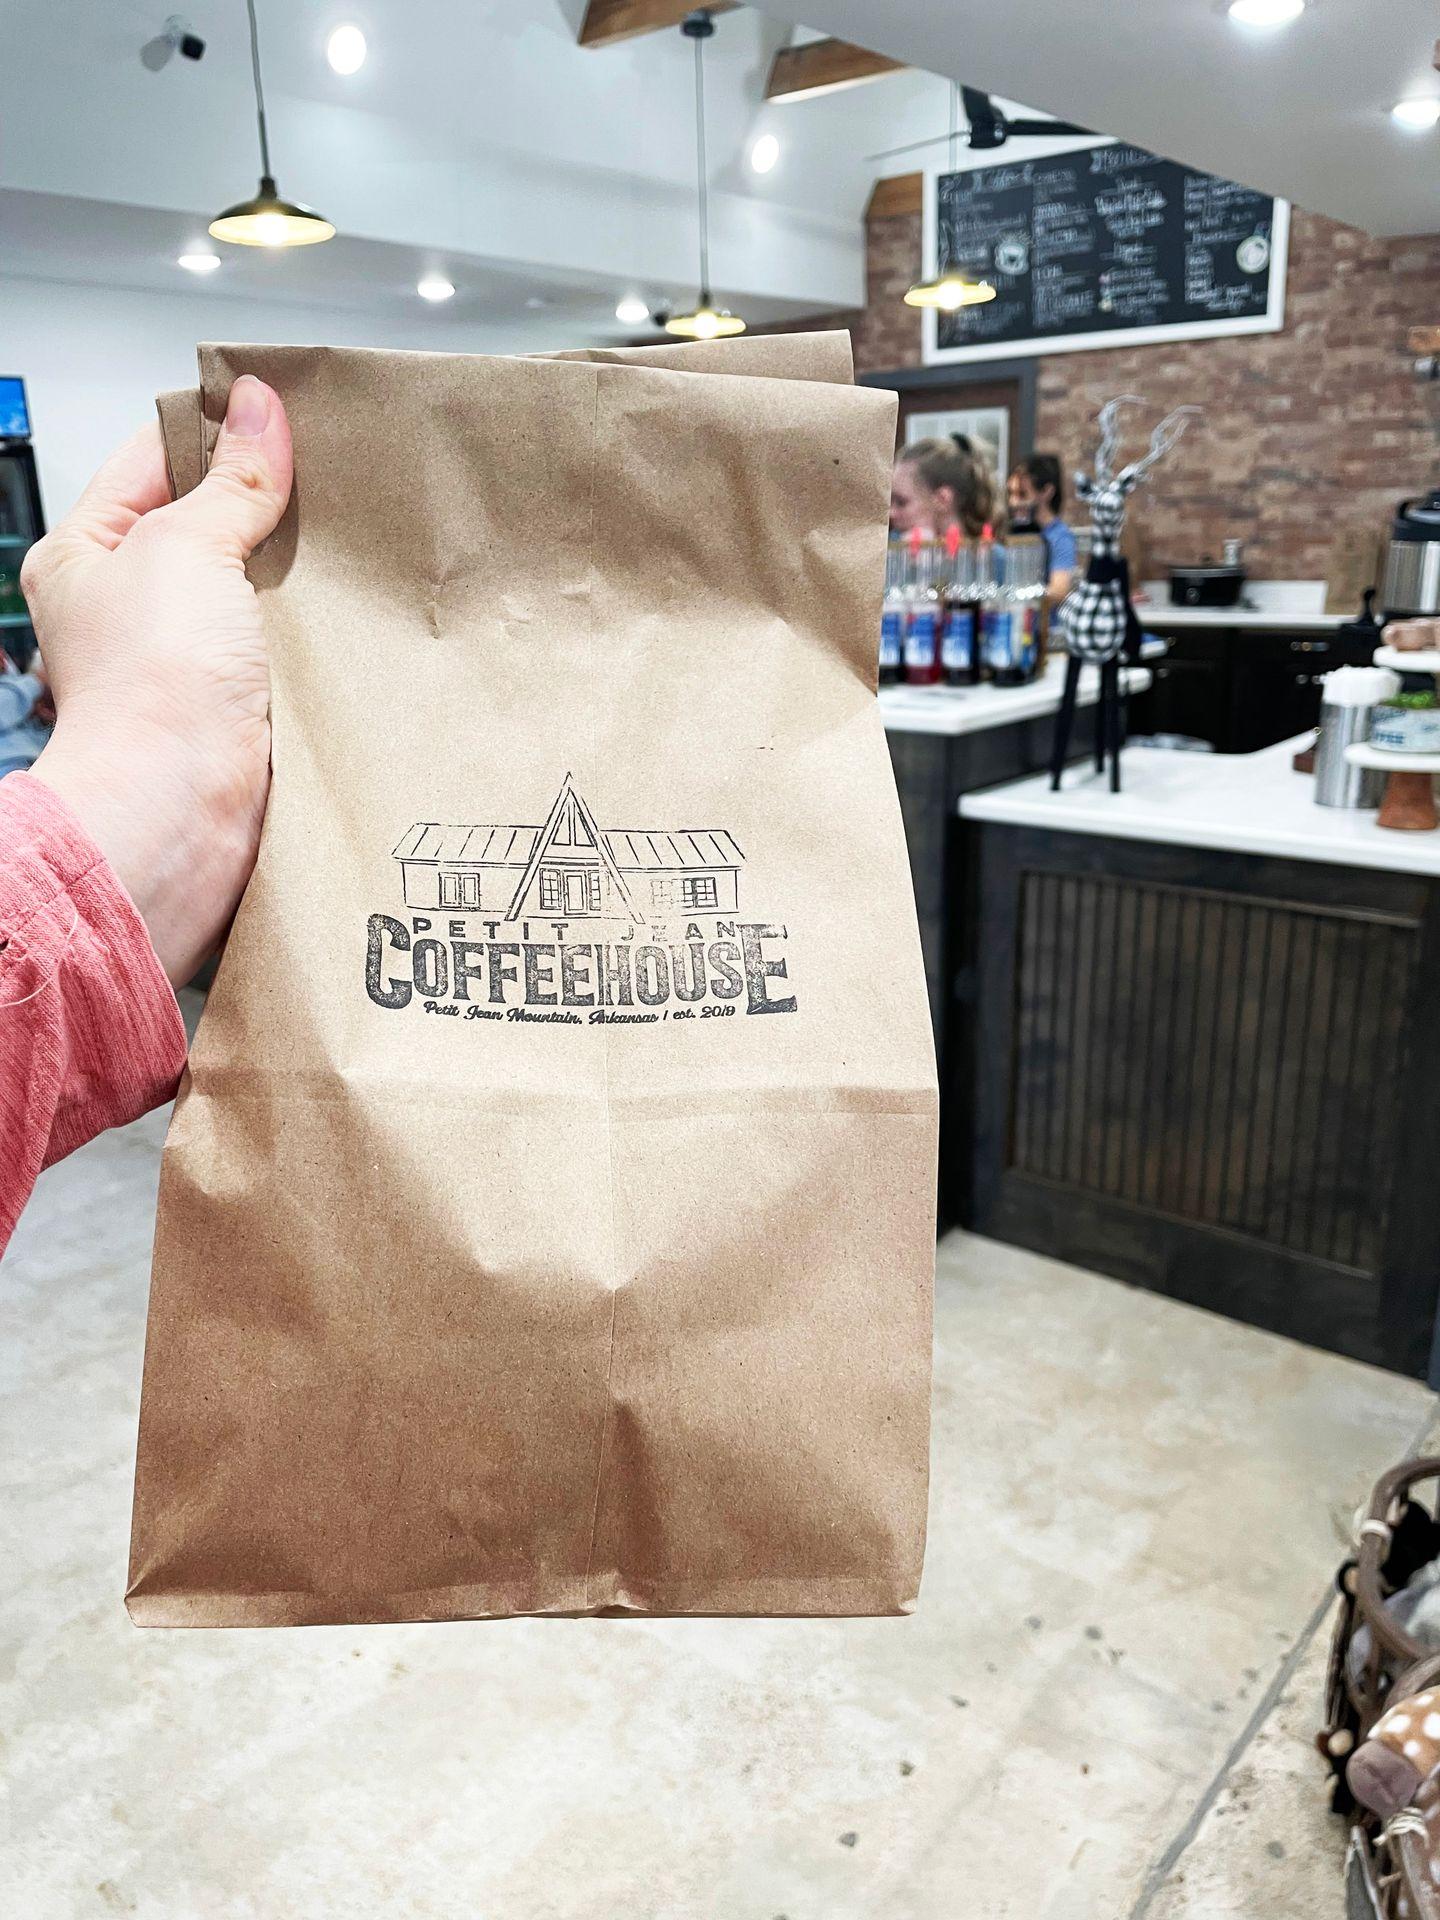 Holding up a brown paper bag that is stamped with the Petit Jean Coffeehouse logo